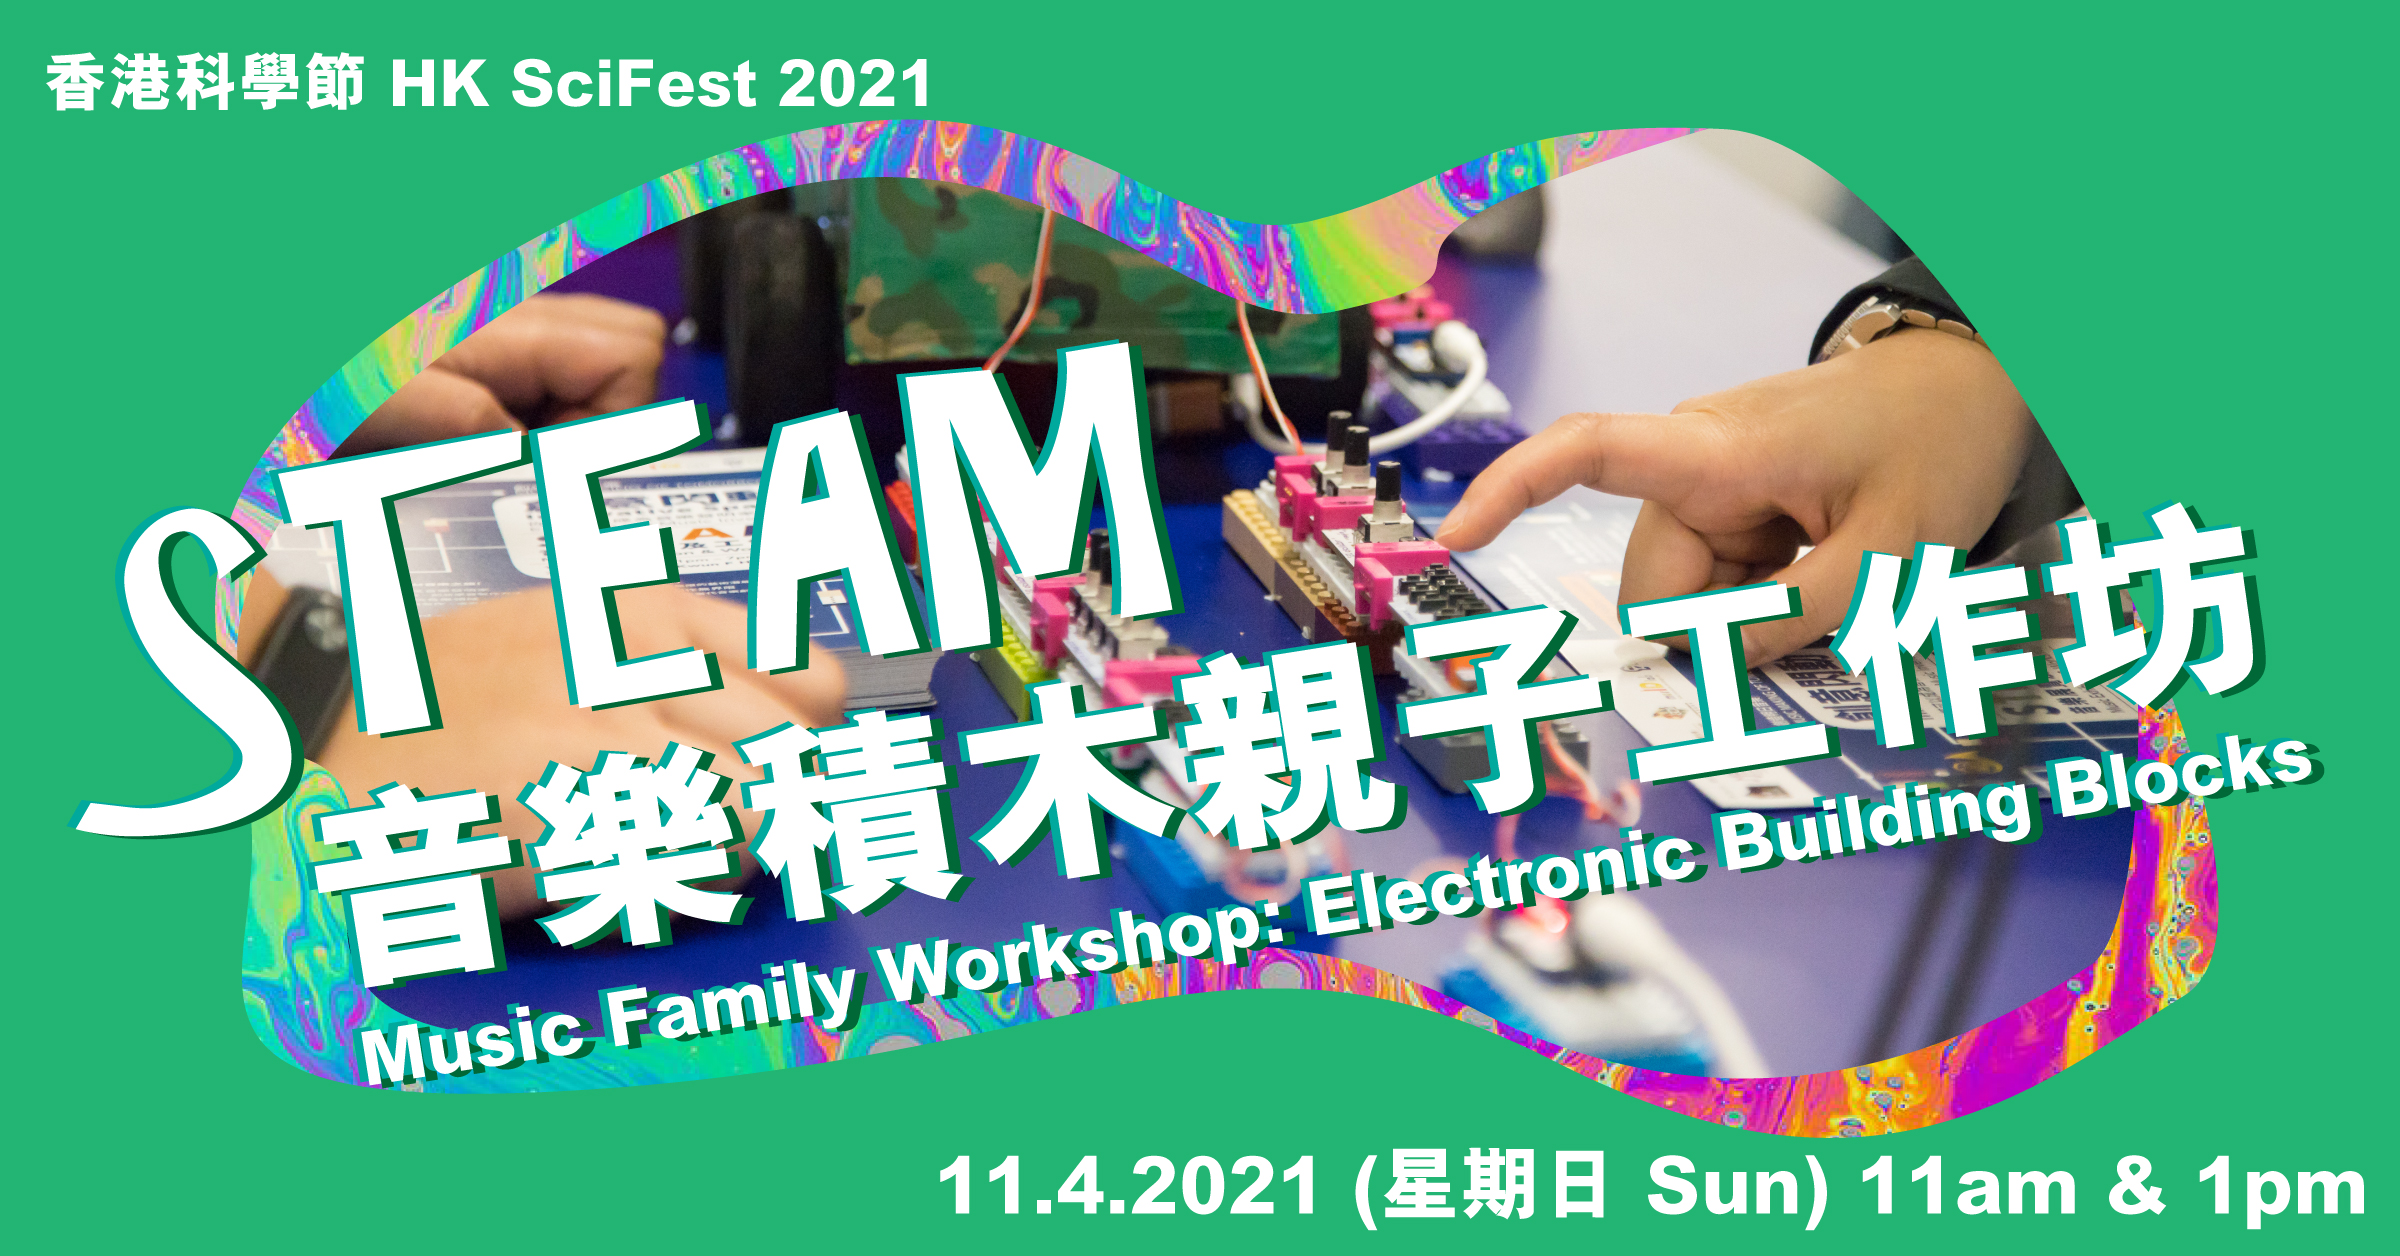 HK SciFest 2021： STEAM Music Family Workshops - Electronic Building Blocks (Completed)